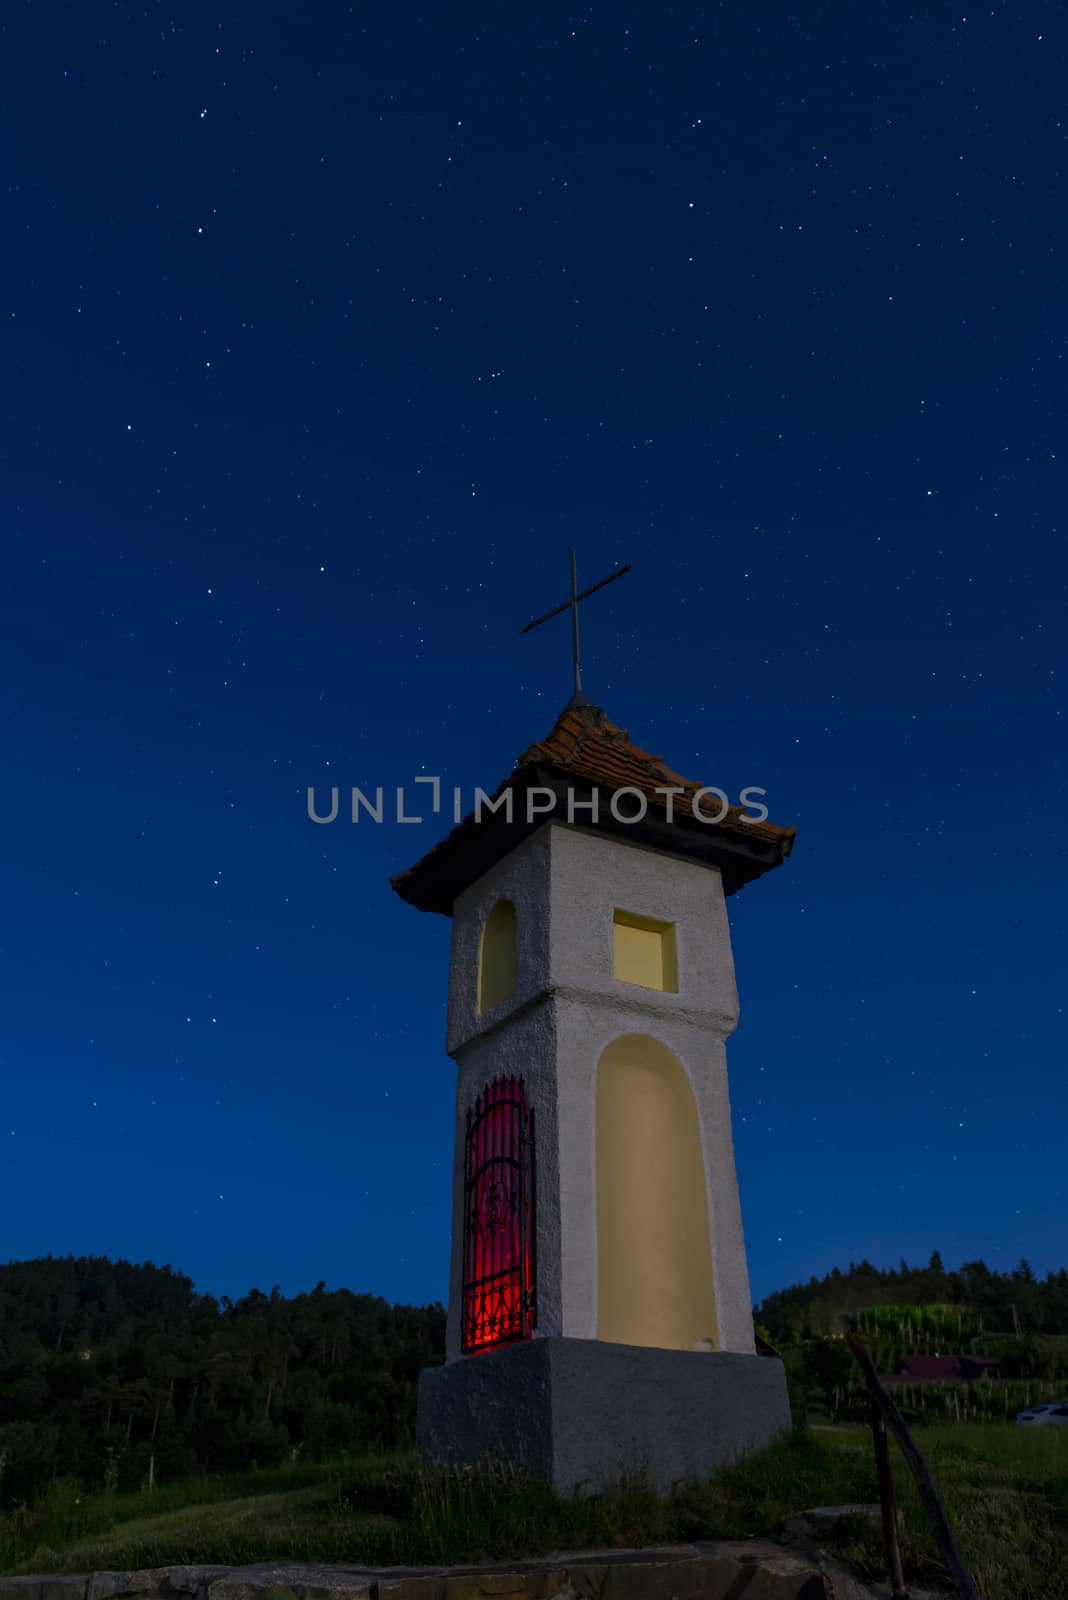 Church in clear, starry night with Ursa Maior - Big bear and Pol by asafaric